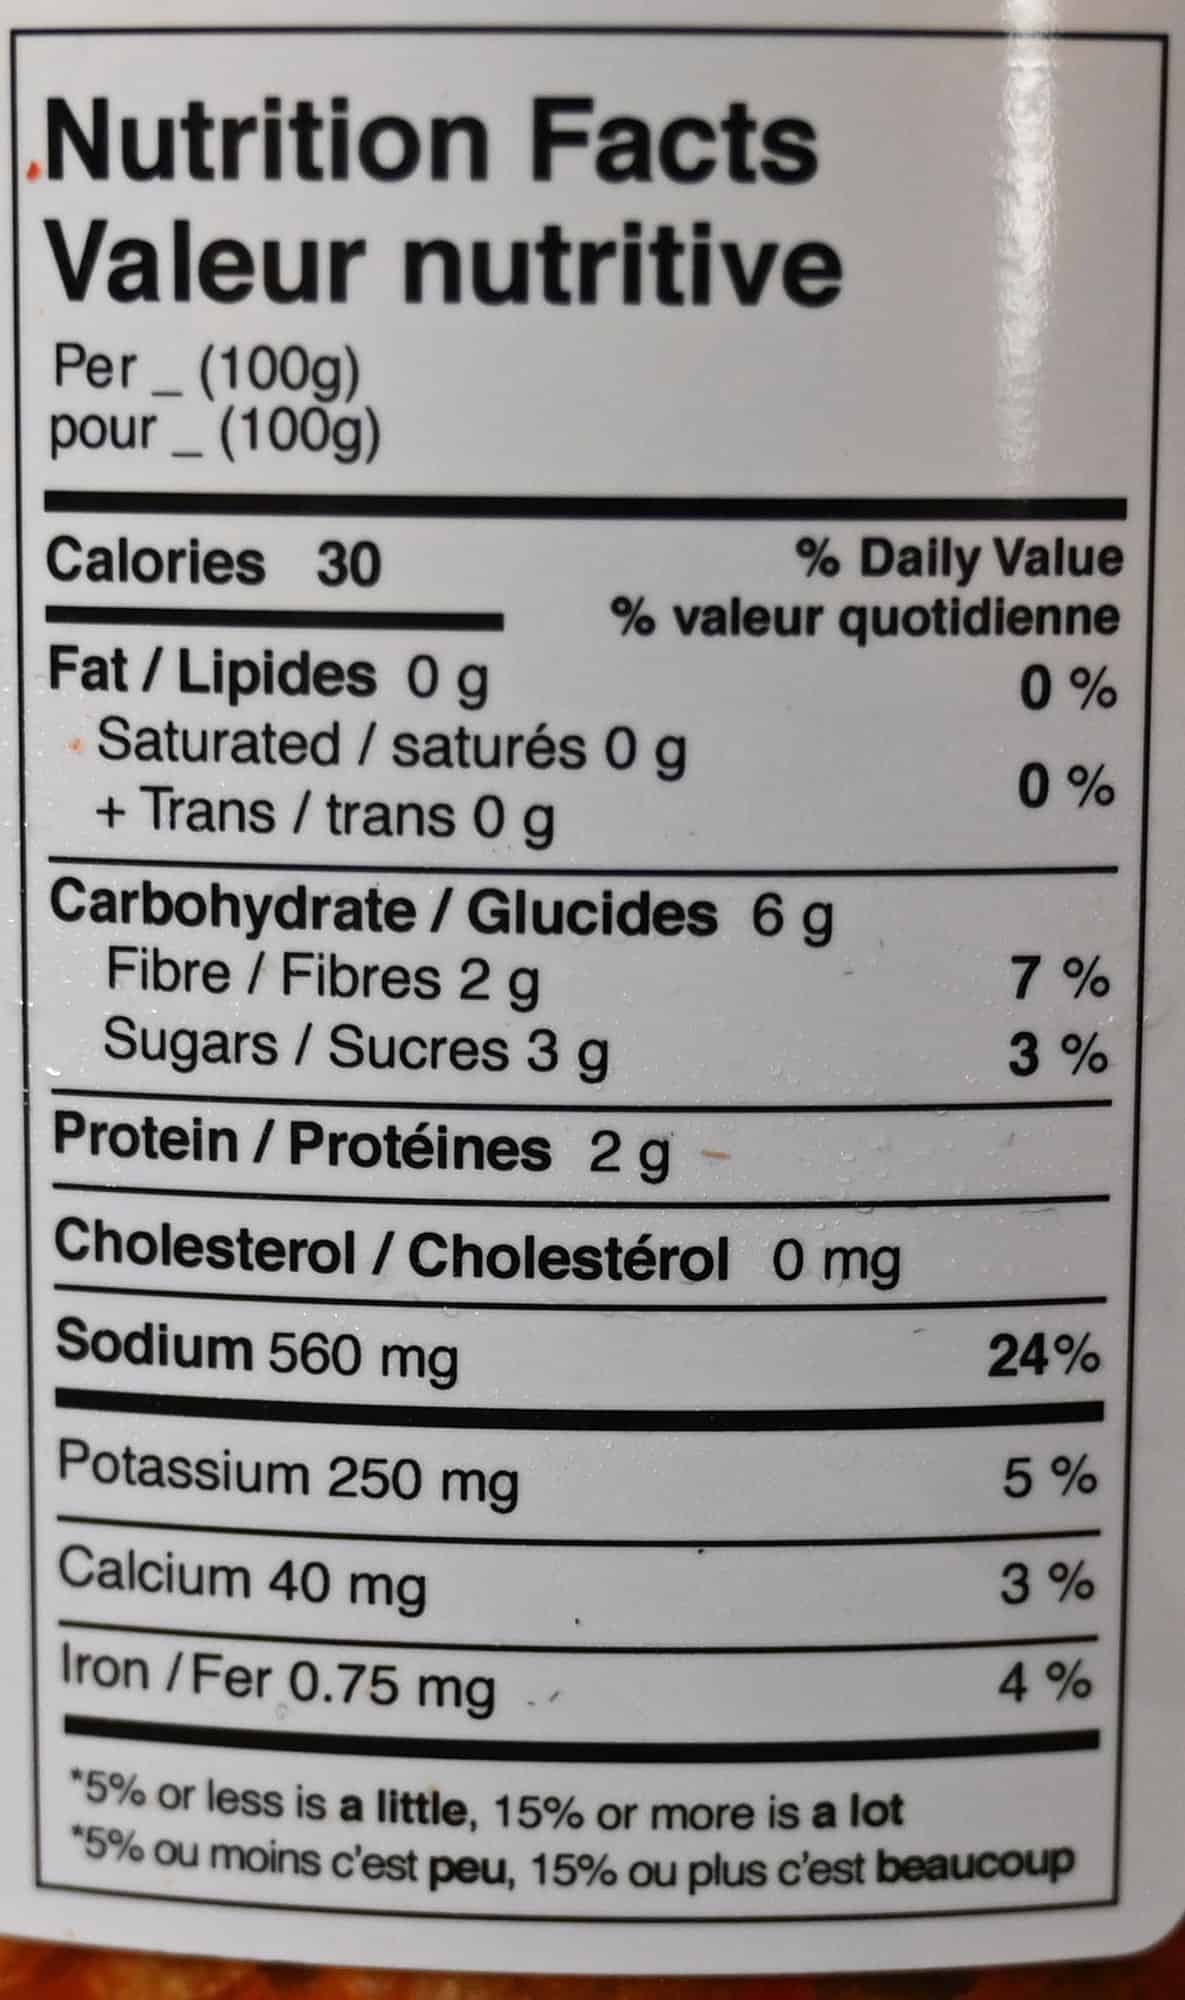 Kimchi nutrition facts from the container.